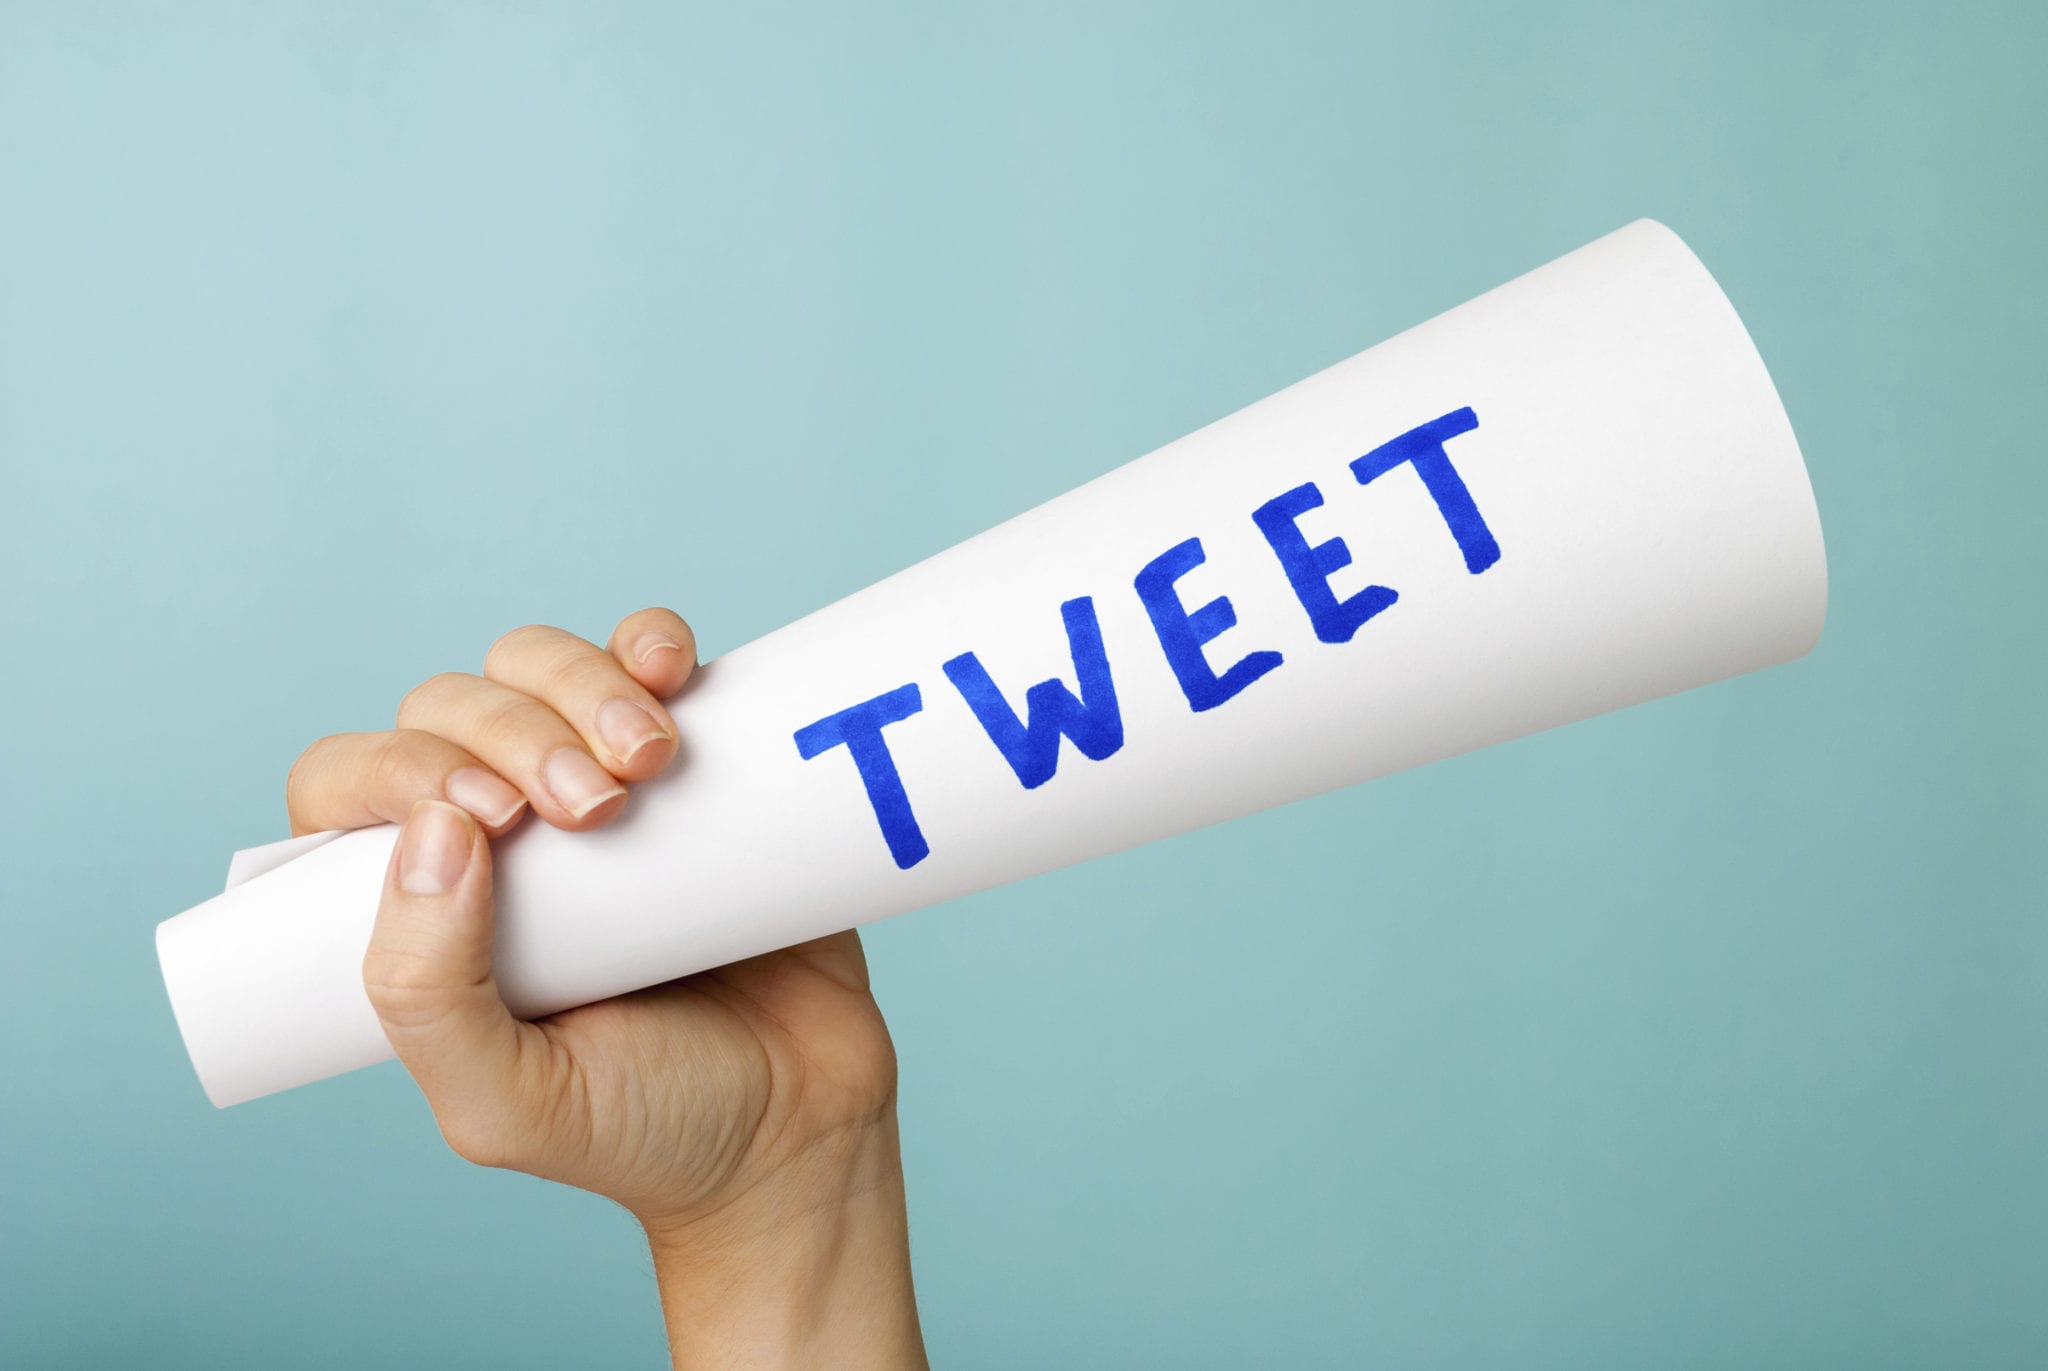 4 Practical Ways to Get More Quality Twitter Followers